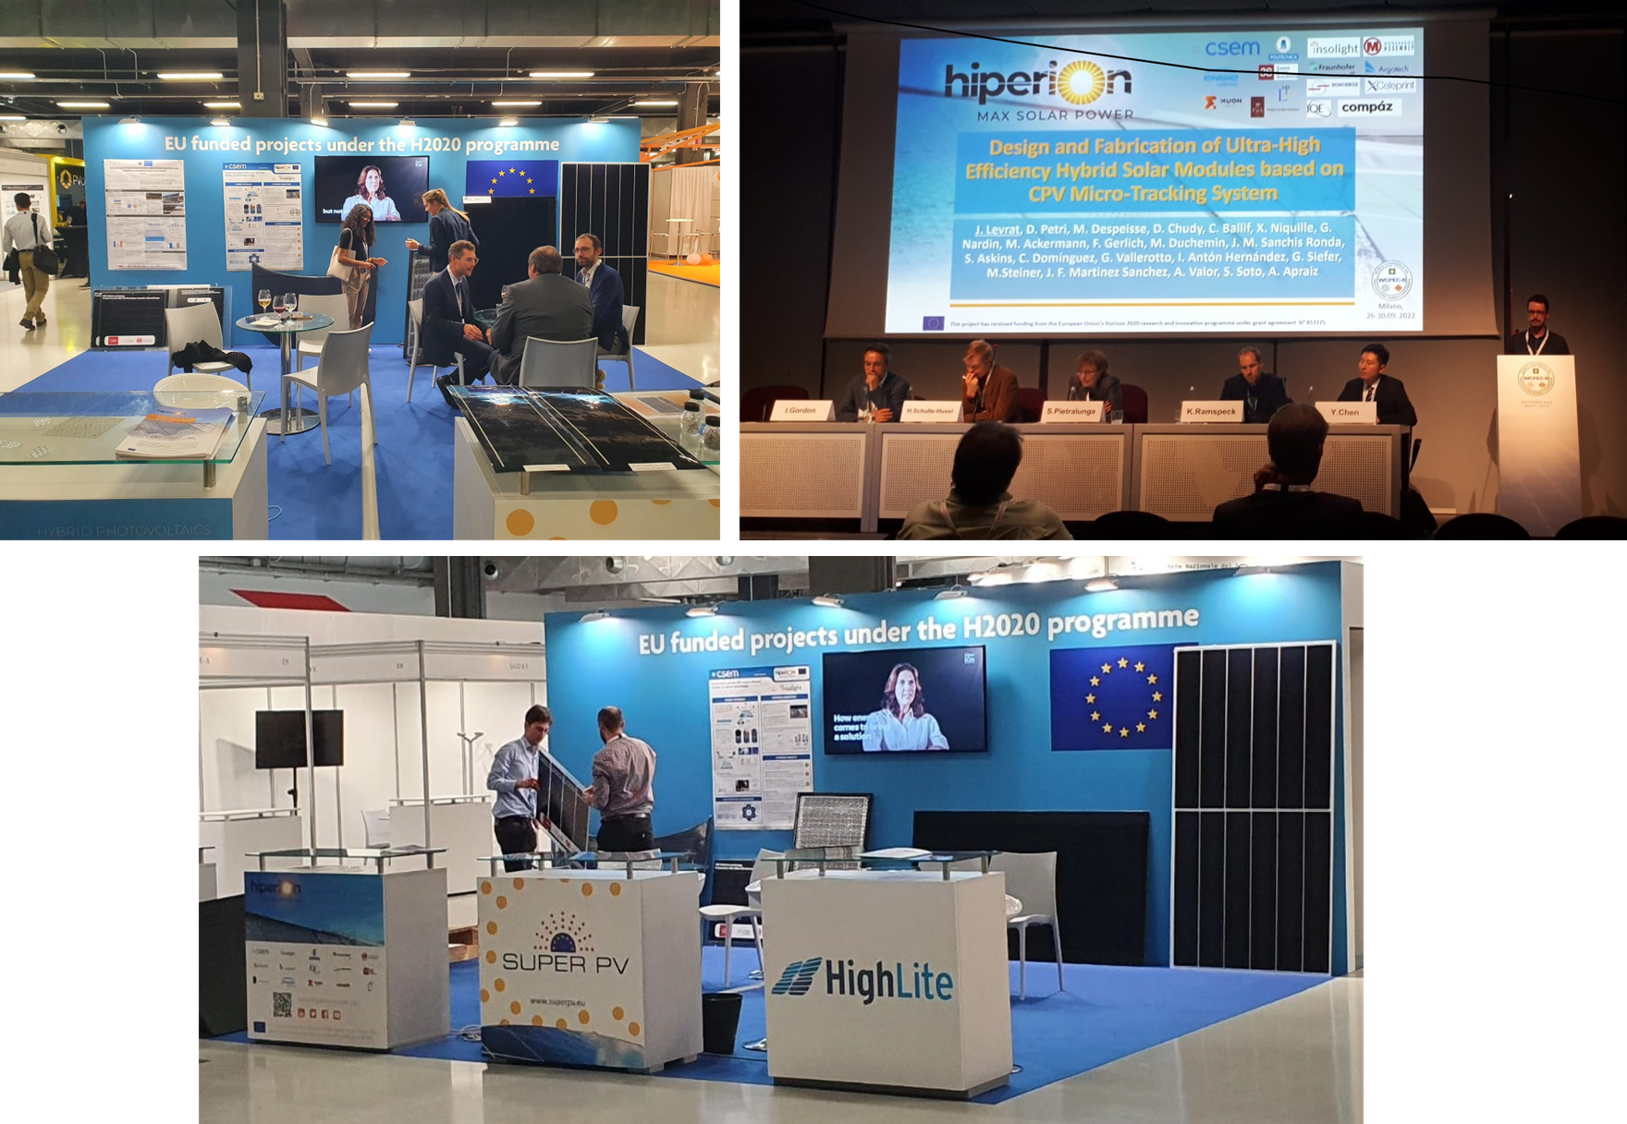 top left and bottom: HIPERION booth at the WCPEC-8 exhibition. Top right: Jacques Levrat (CSEM) presenting HIPERION at the WCPEC-8 conference